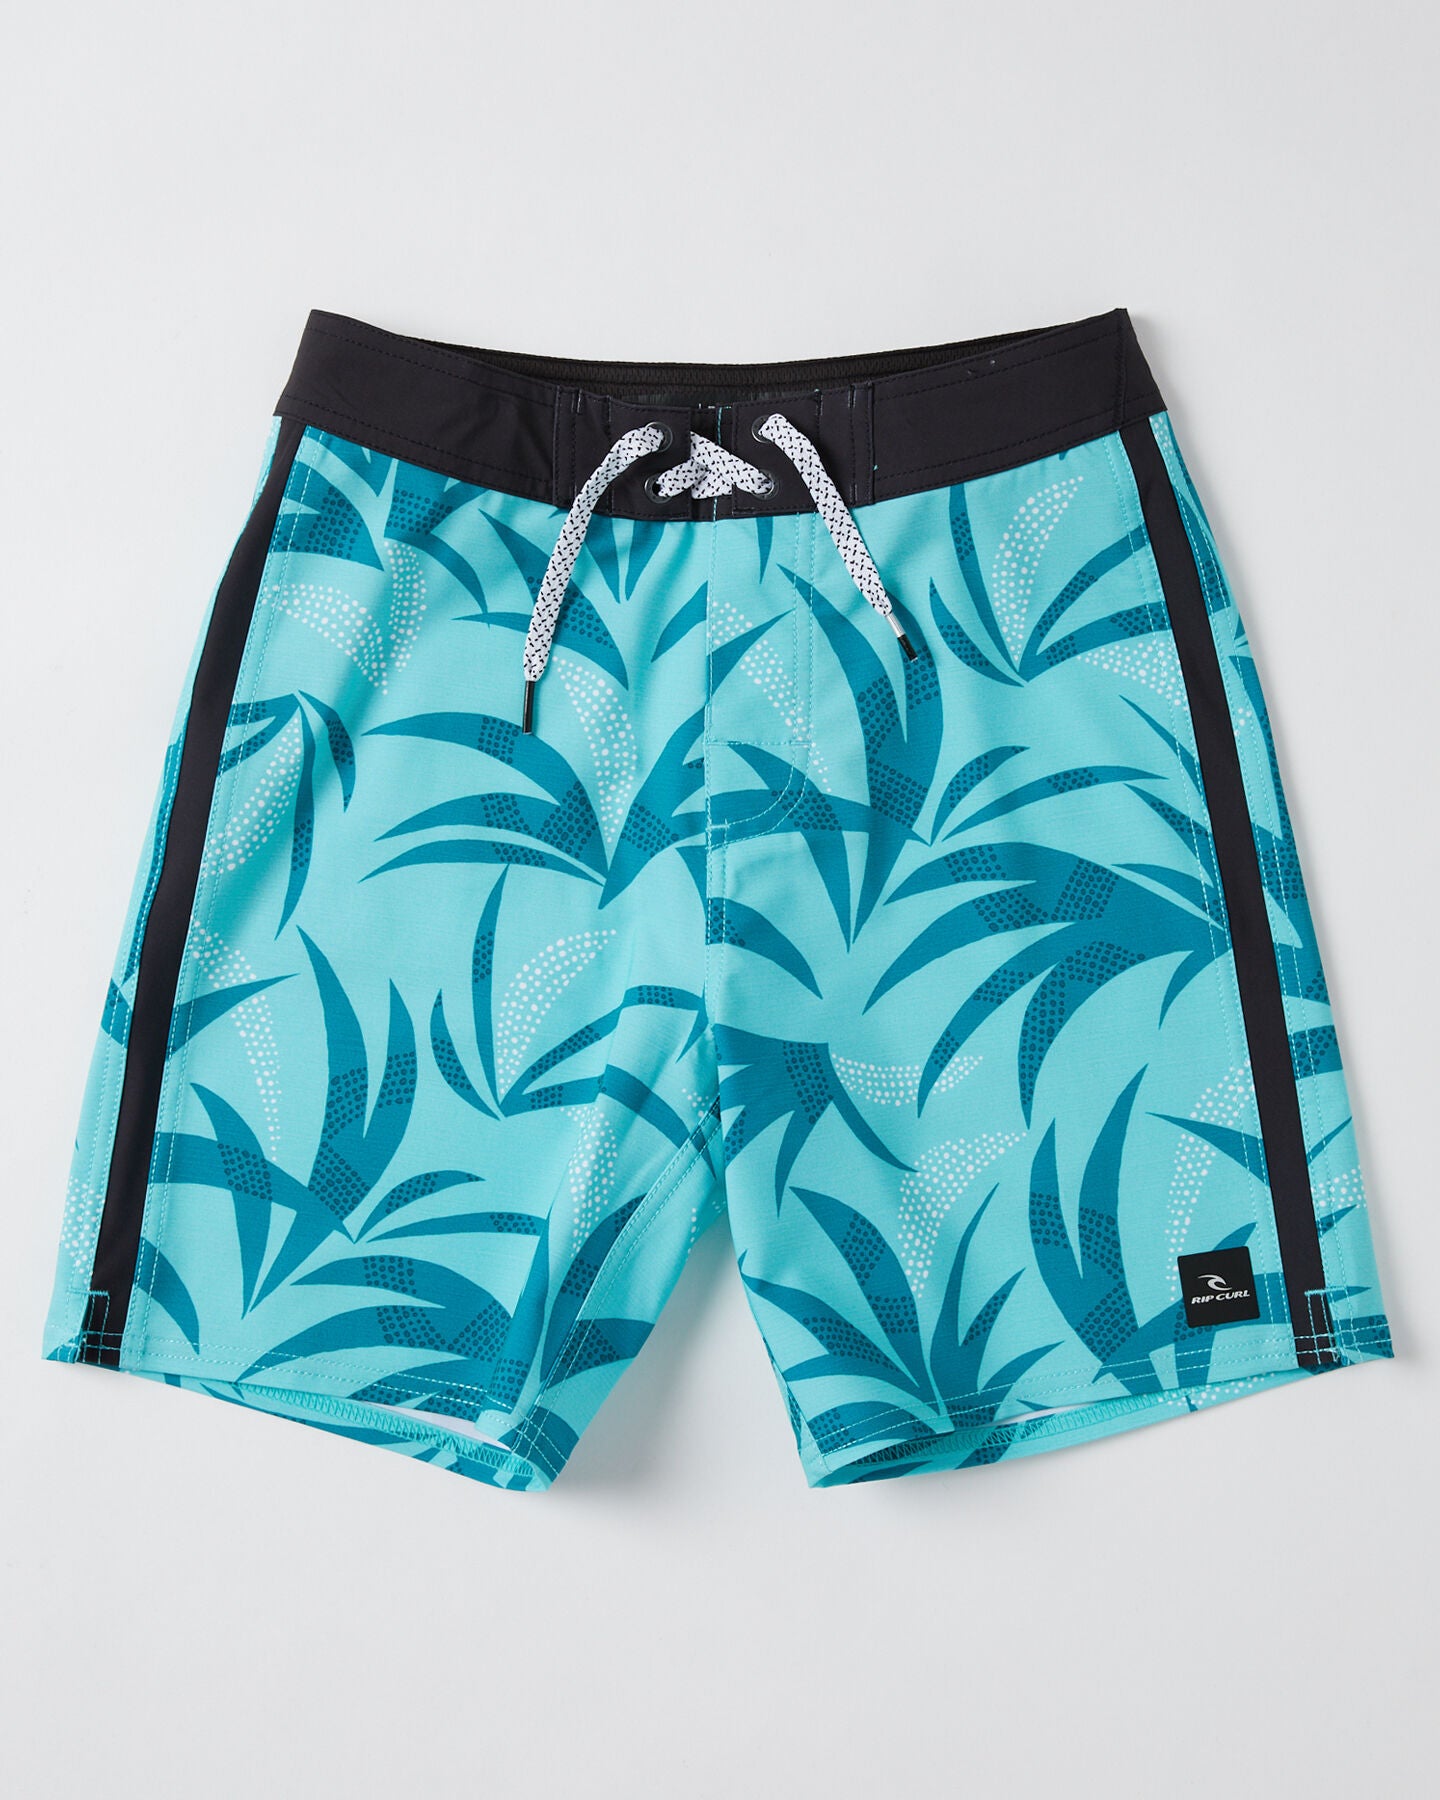 RIP CURL MIRAGE ANGOURIE FLORAL 011BBO-0046 BOARDSHORT (YB)